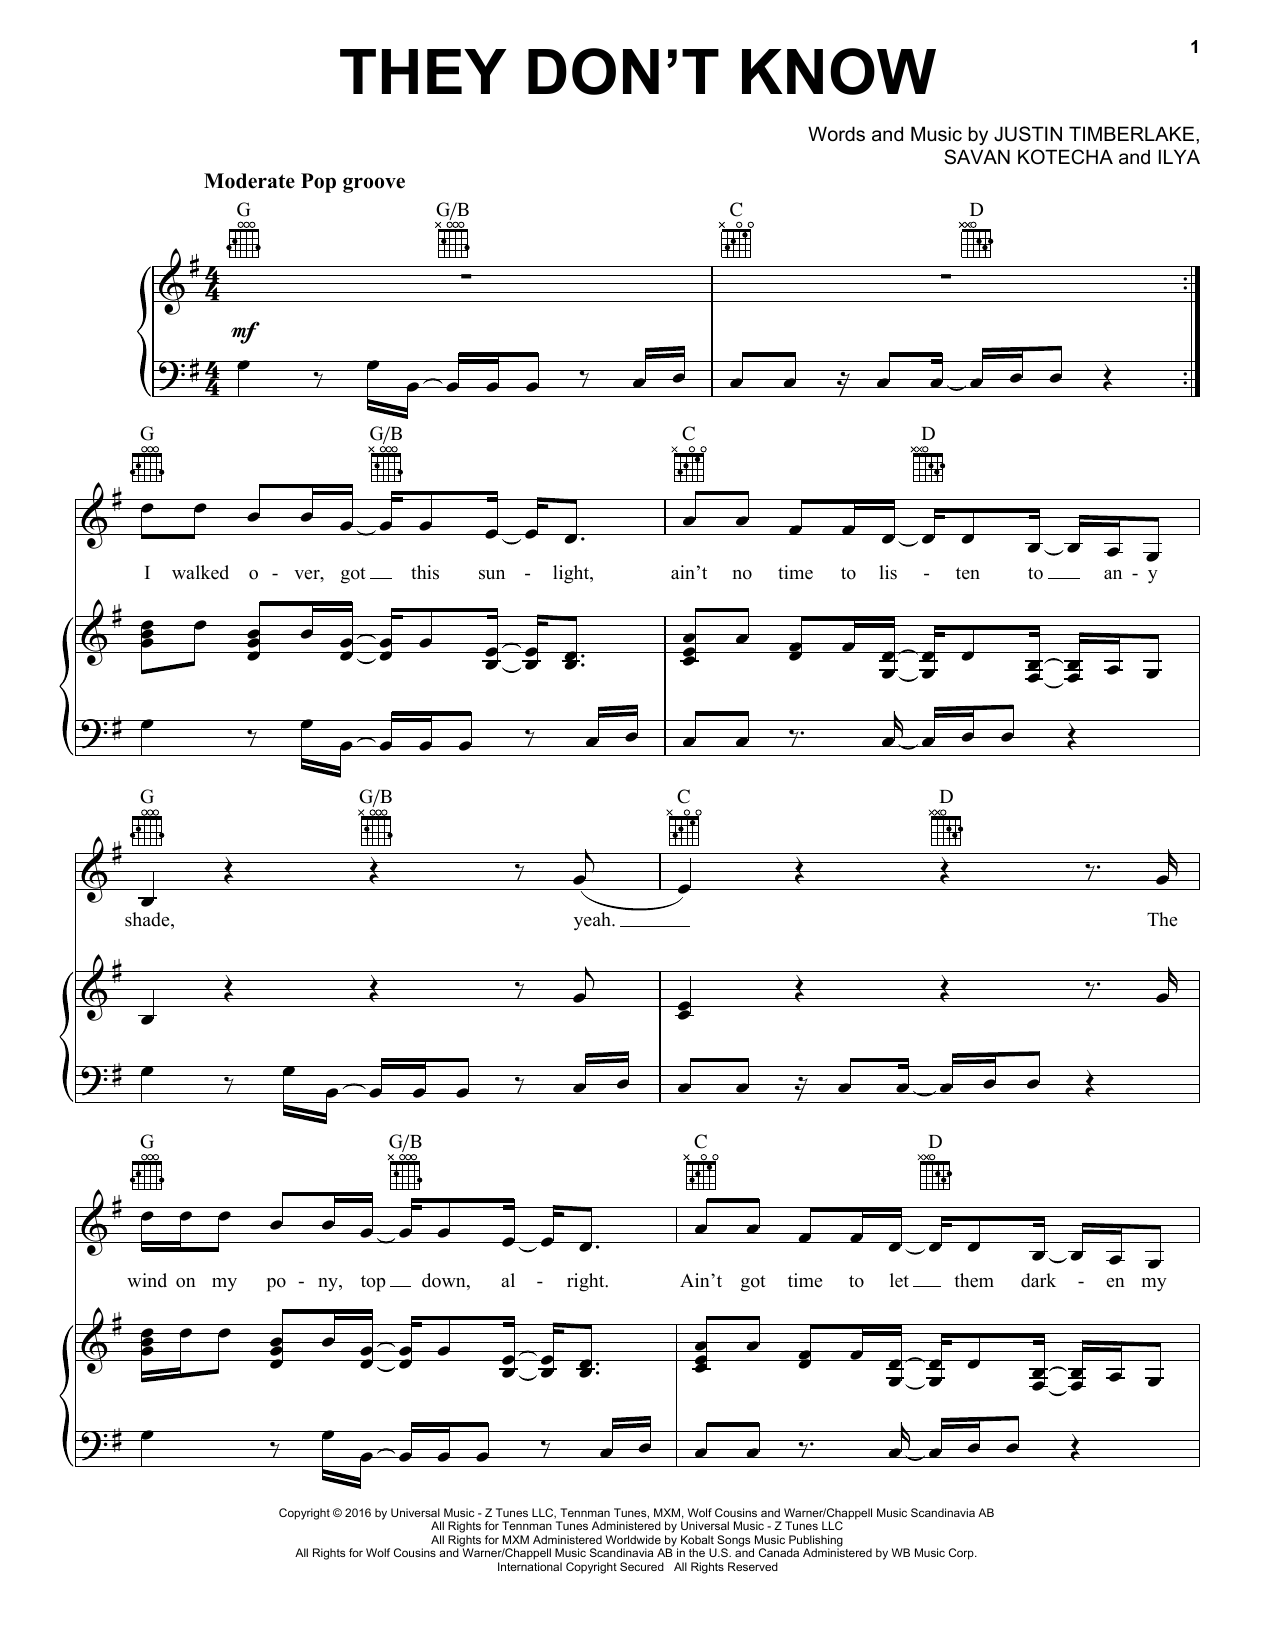 Download Ariana Grande They Don't Know Sheet Music